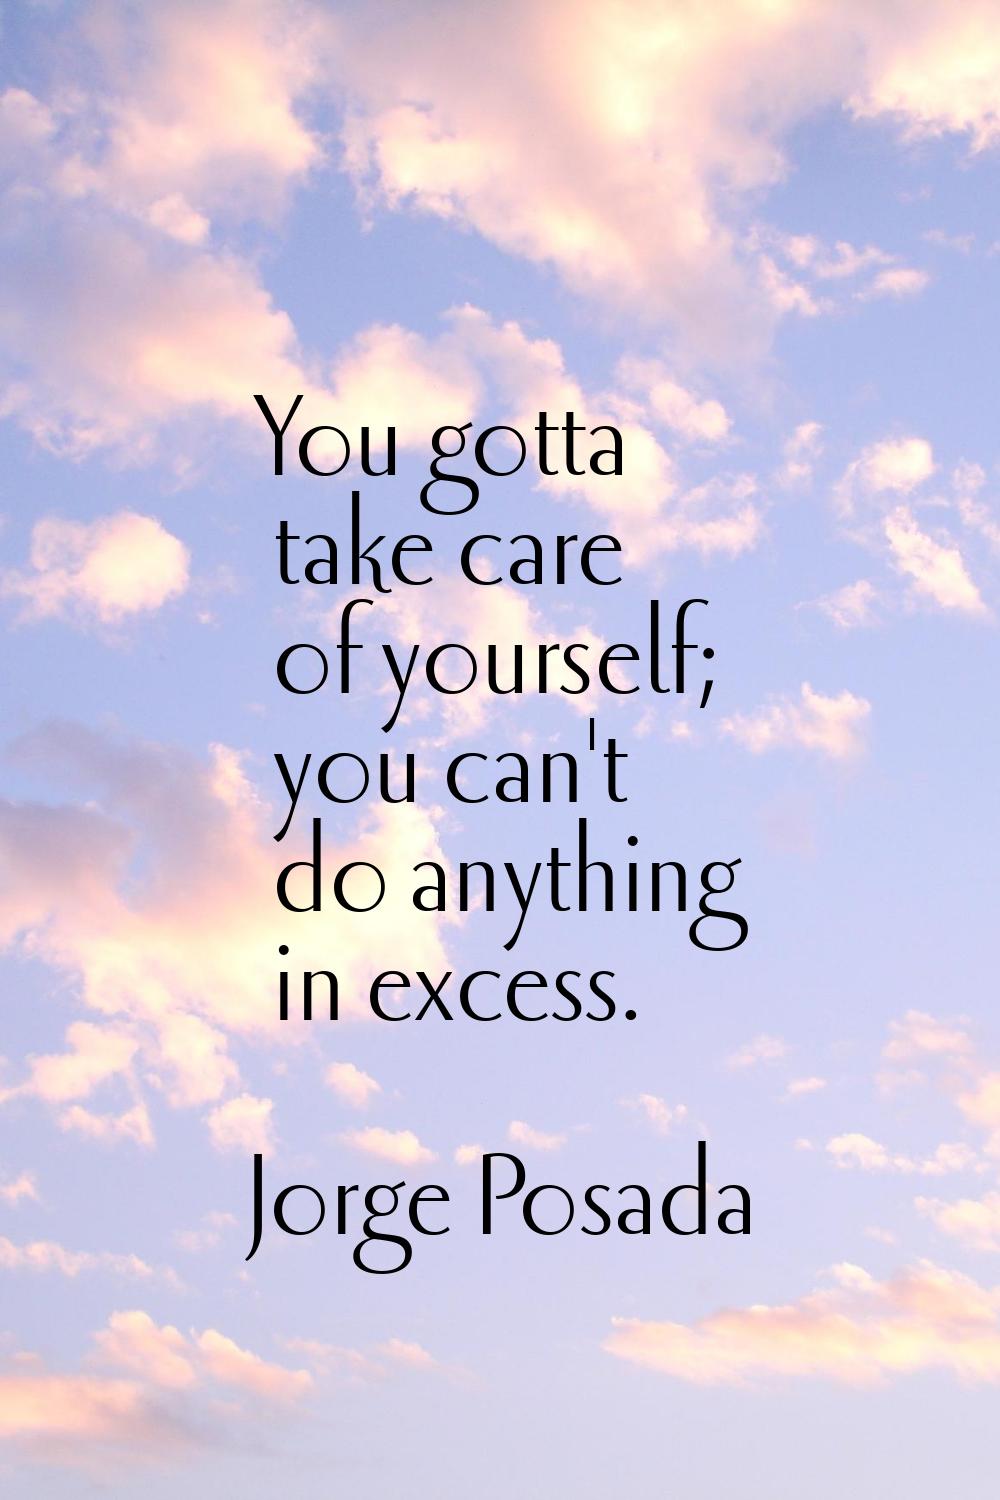 You gotta take care of yourself; you can't do anything in excess.